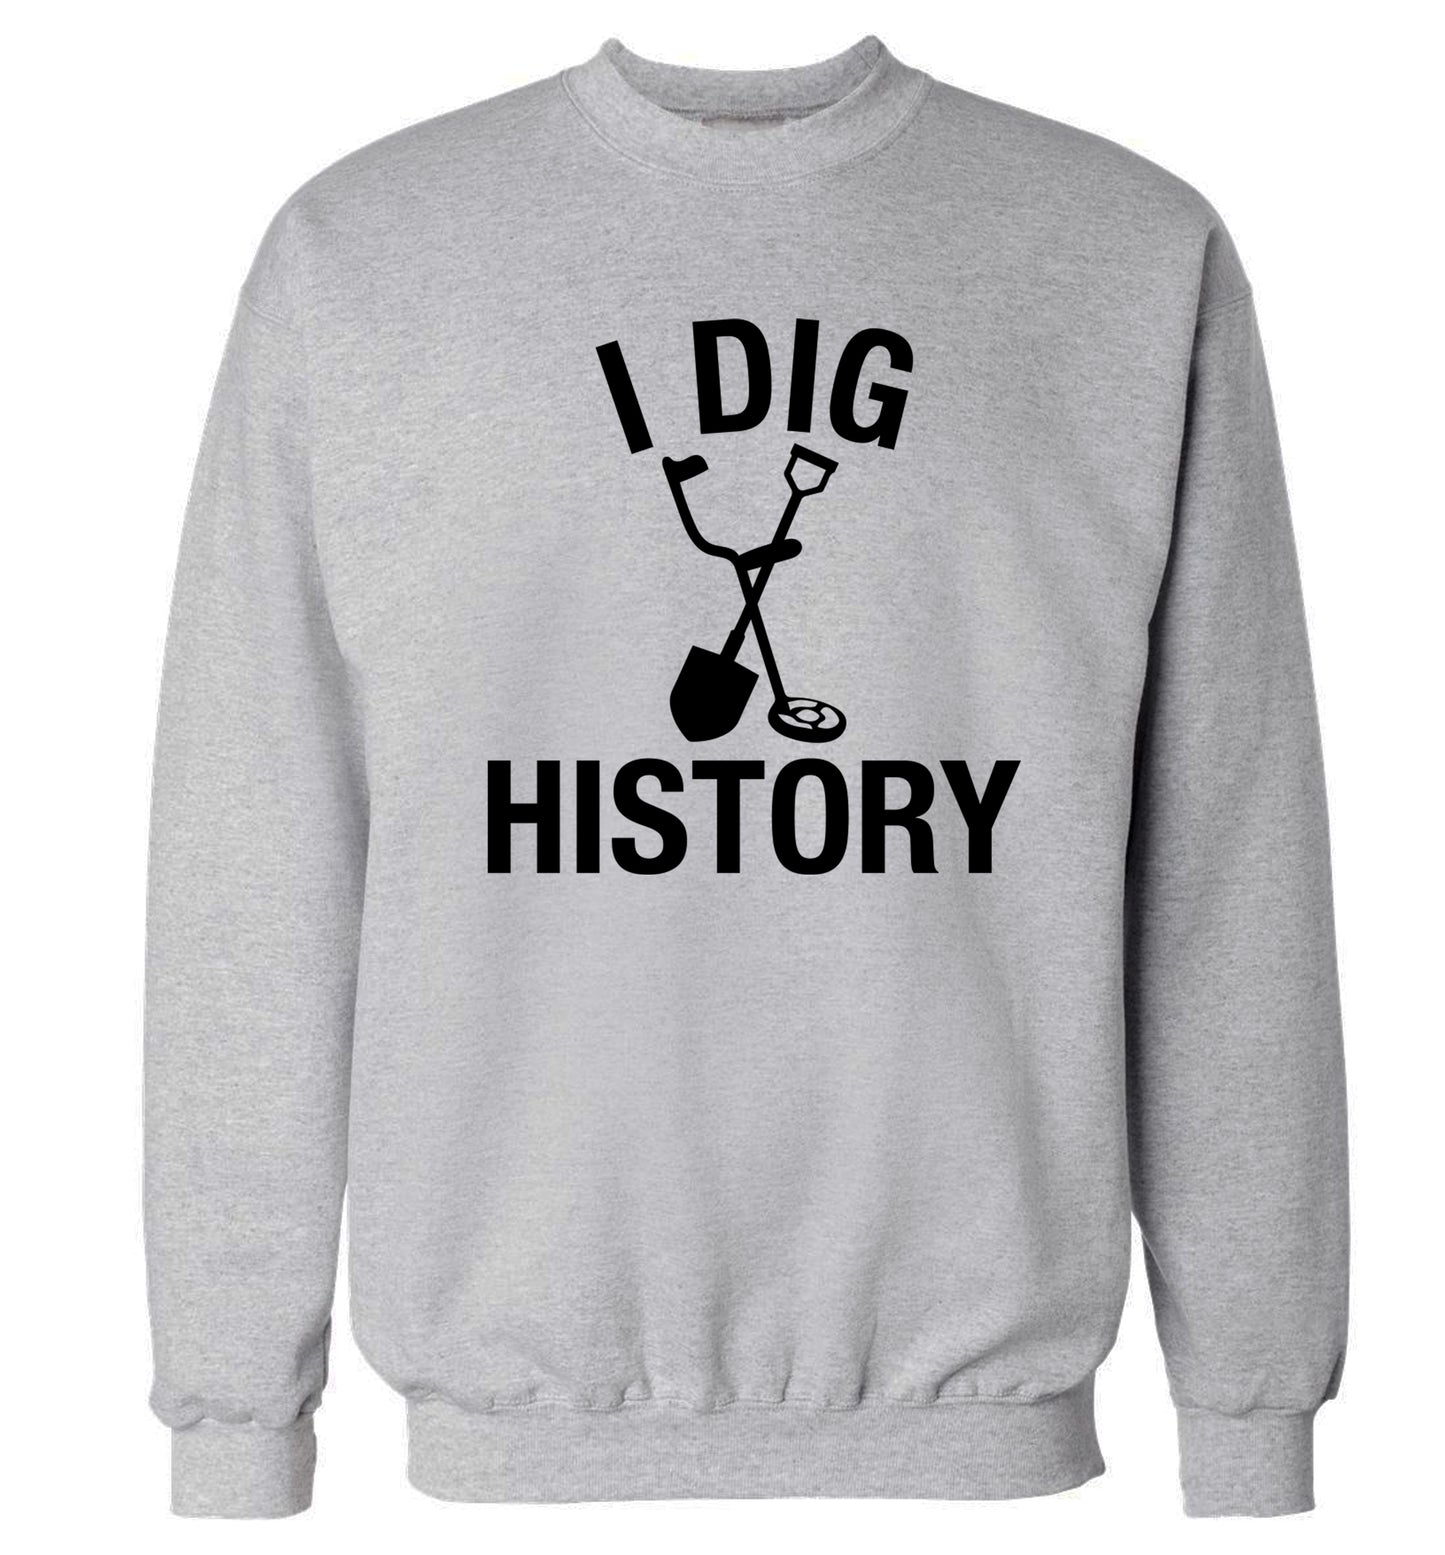 I dig history Adult's unisex grey Sweater 2XL